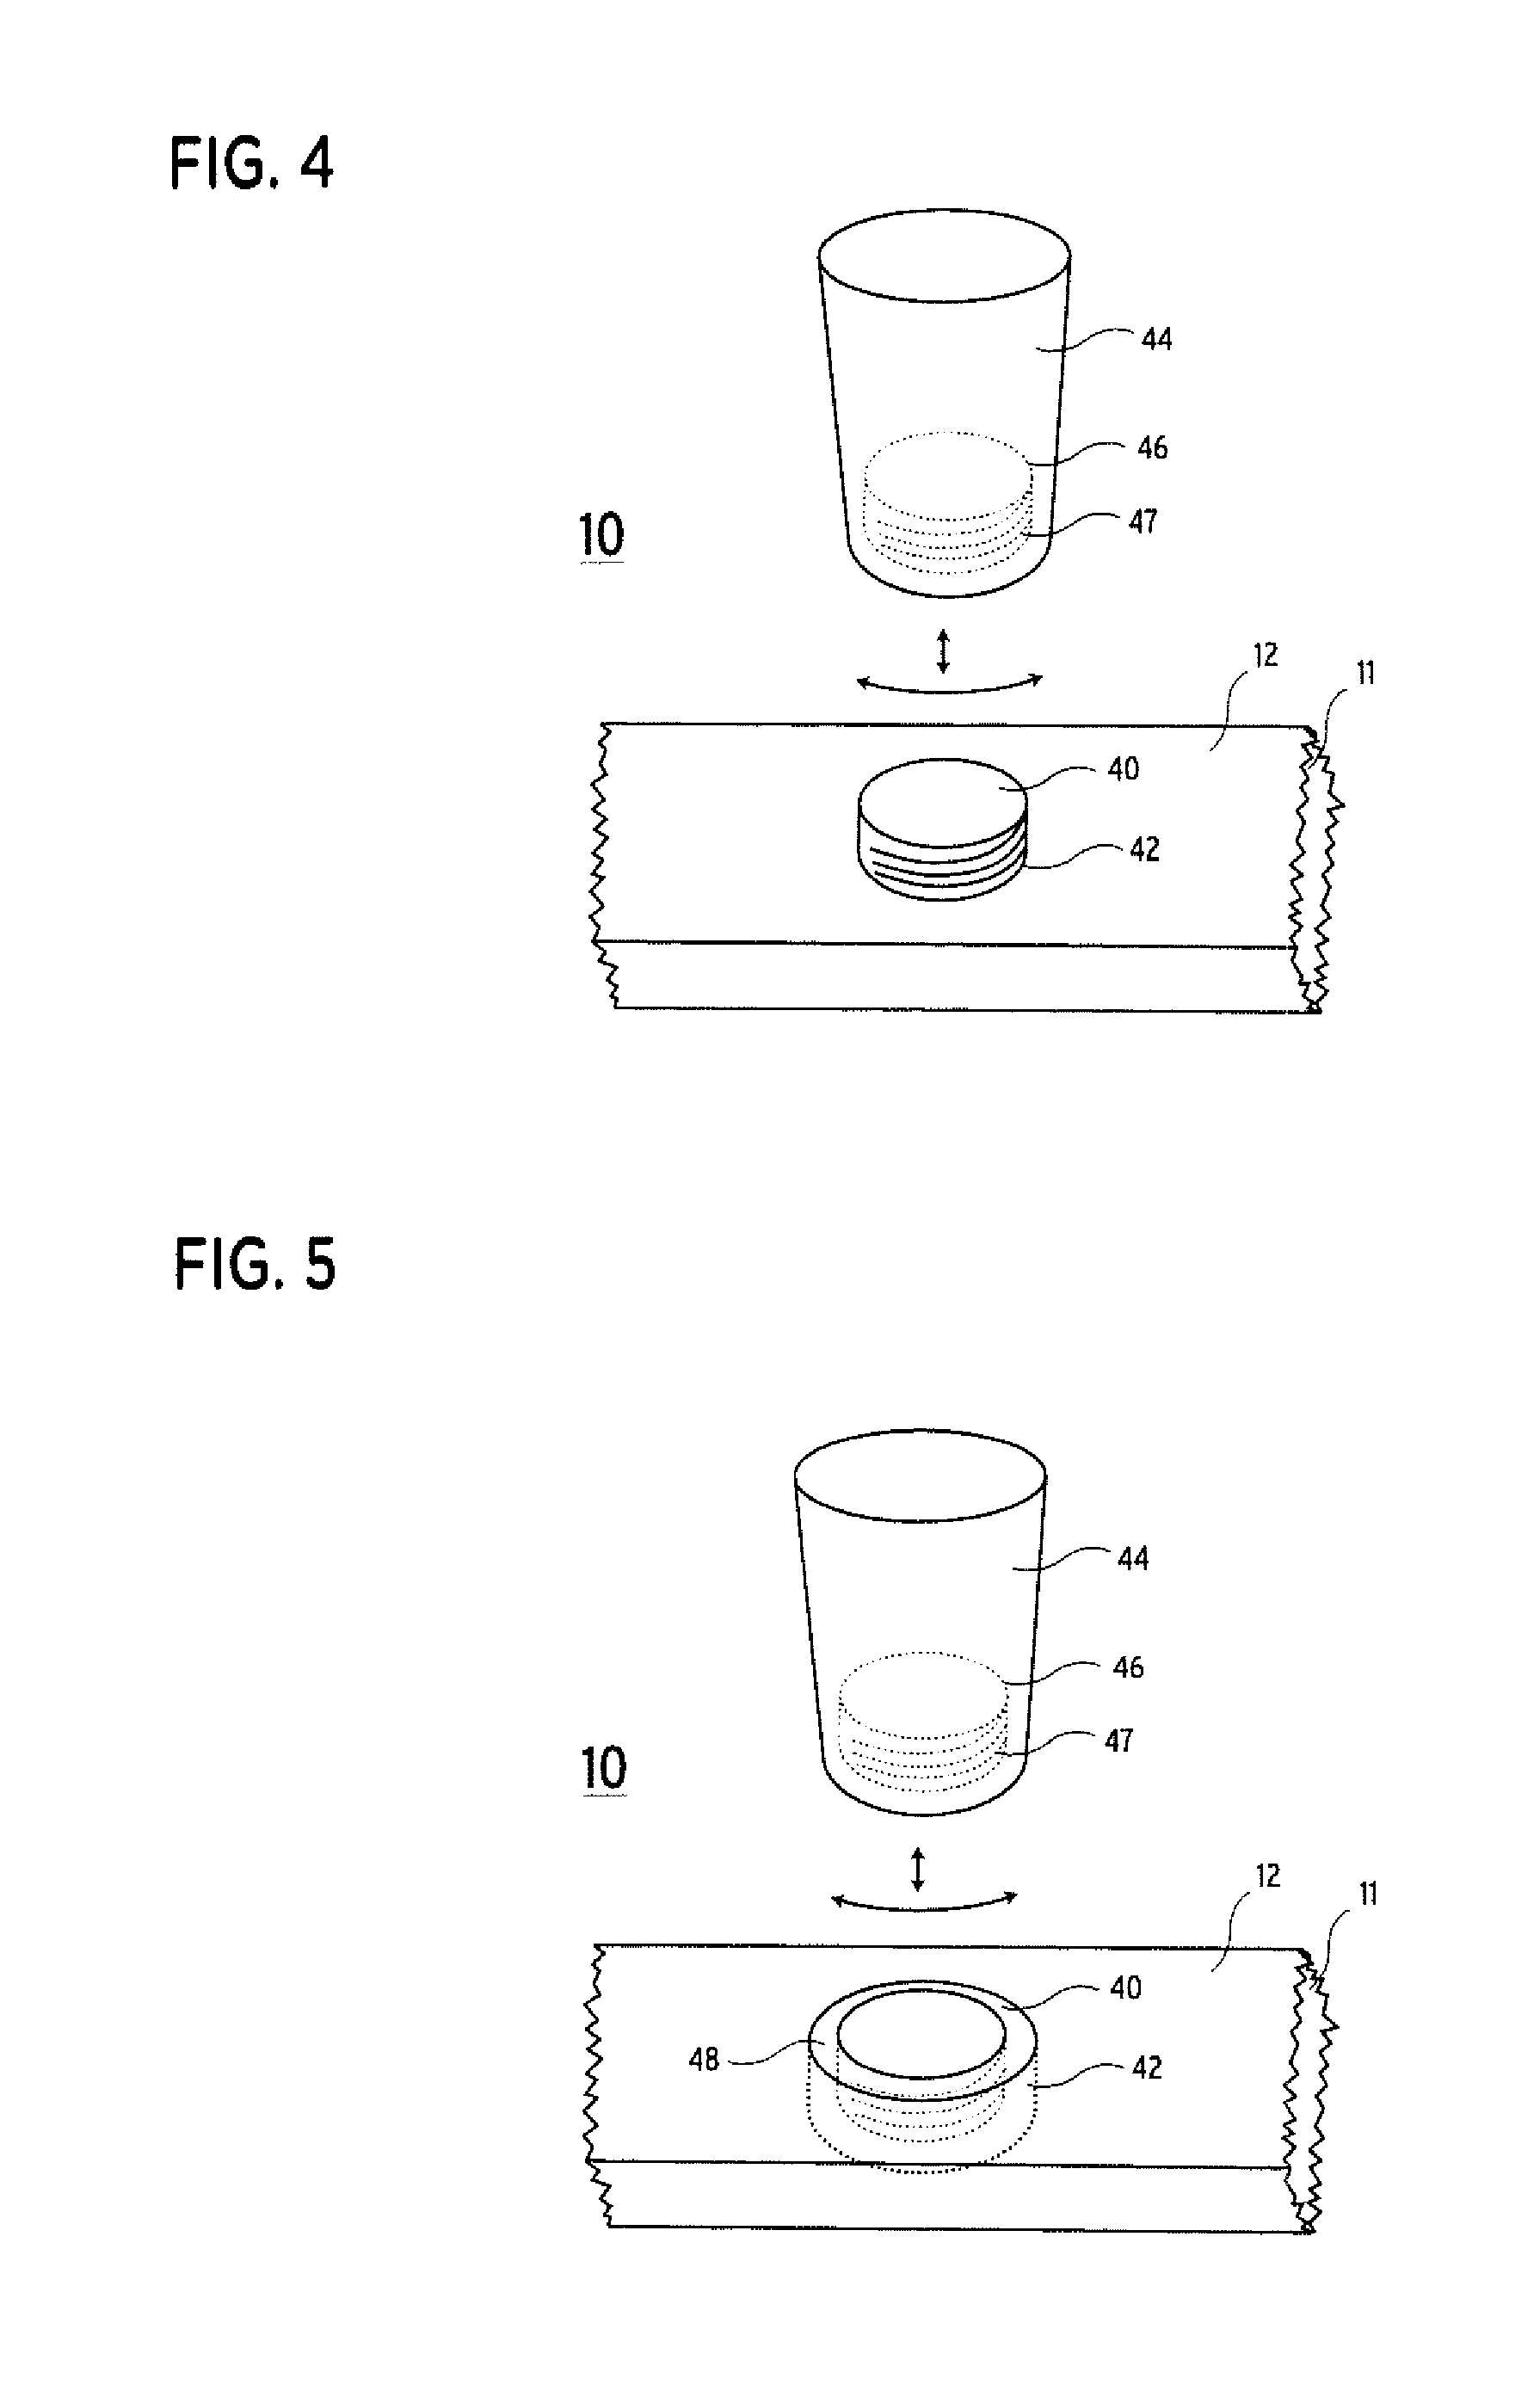 Drinking vessel holding device